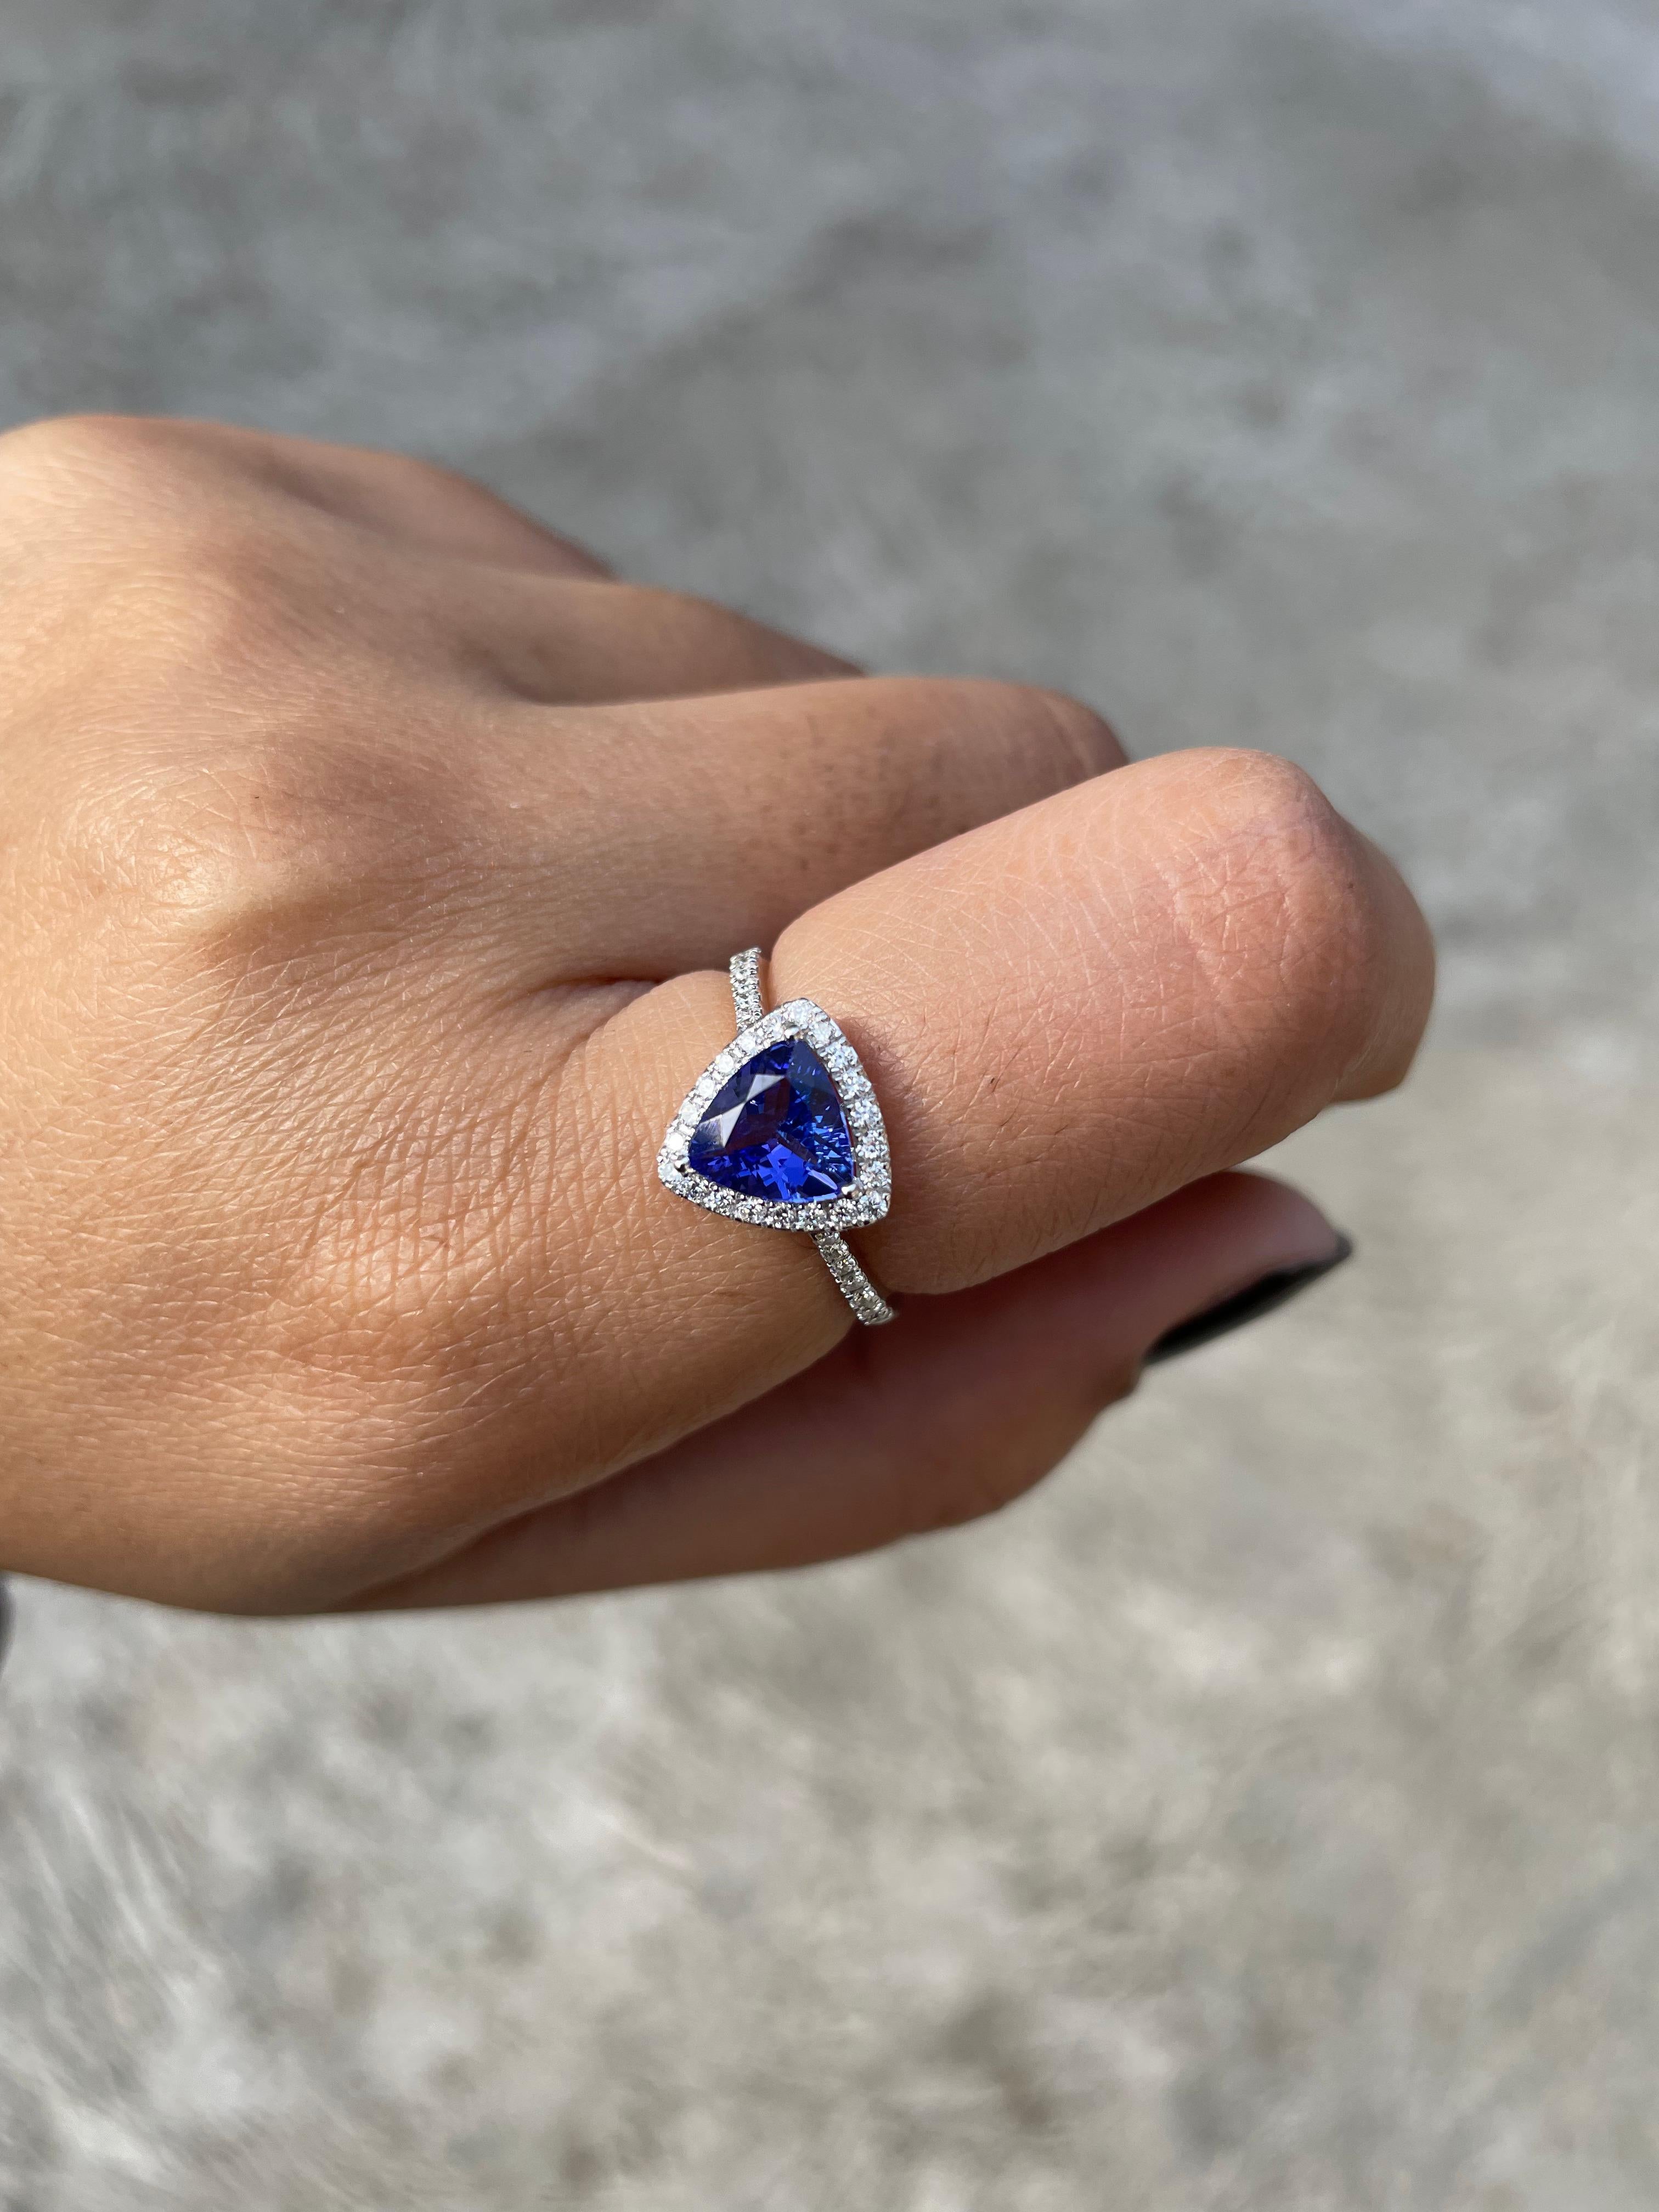 For Sale:  Natural Tanzanite Diamond Engagement Ring in 18k Solid White Gold 5